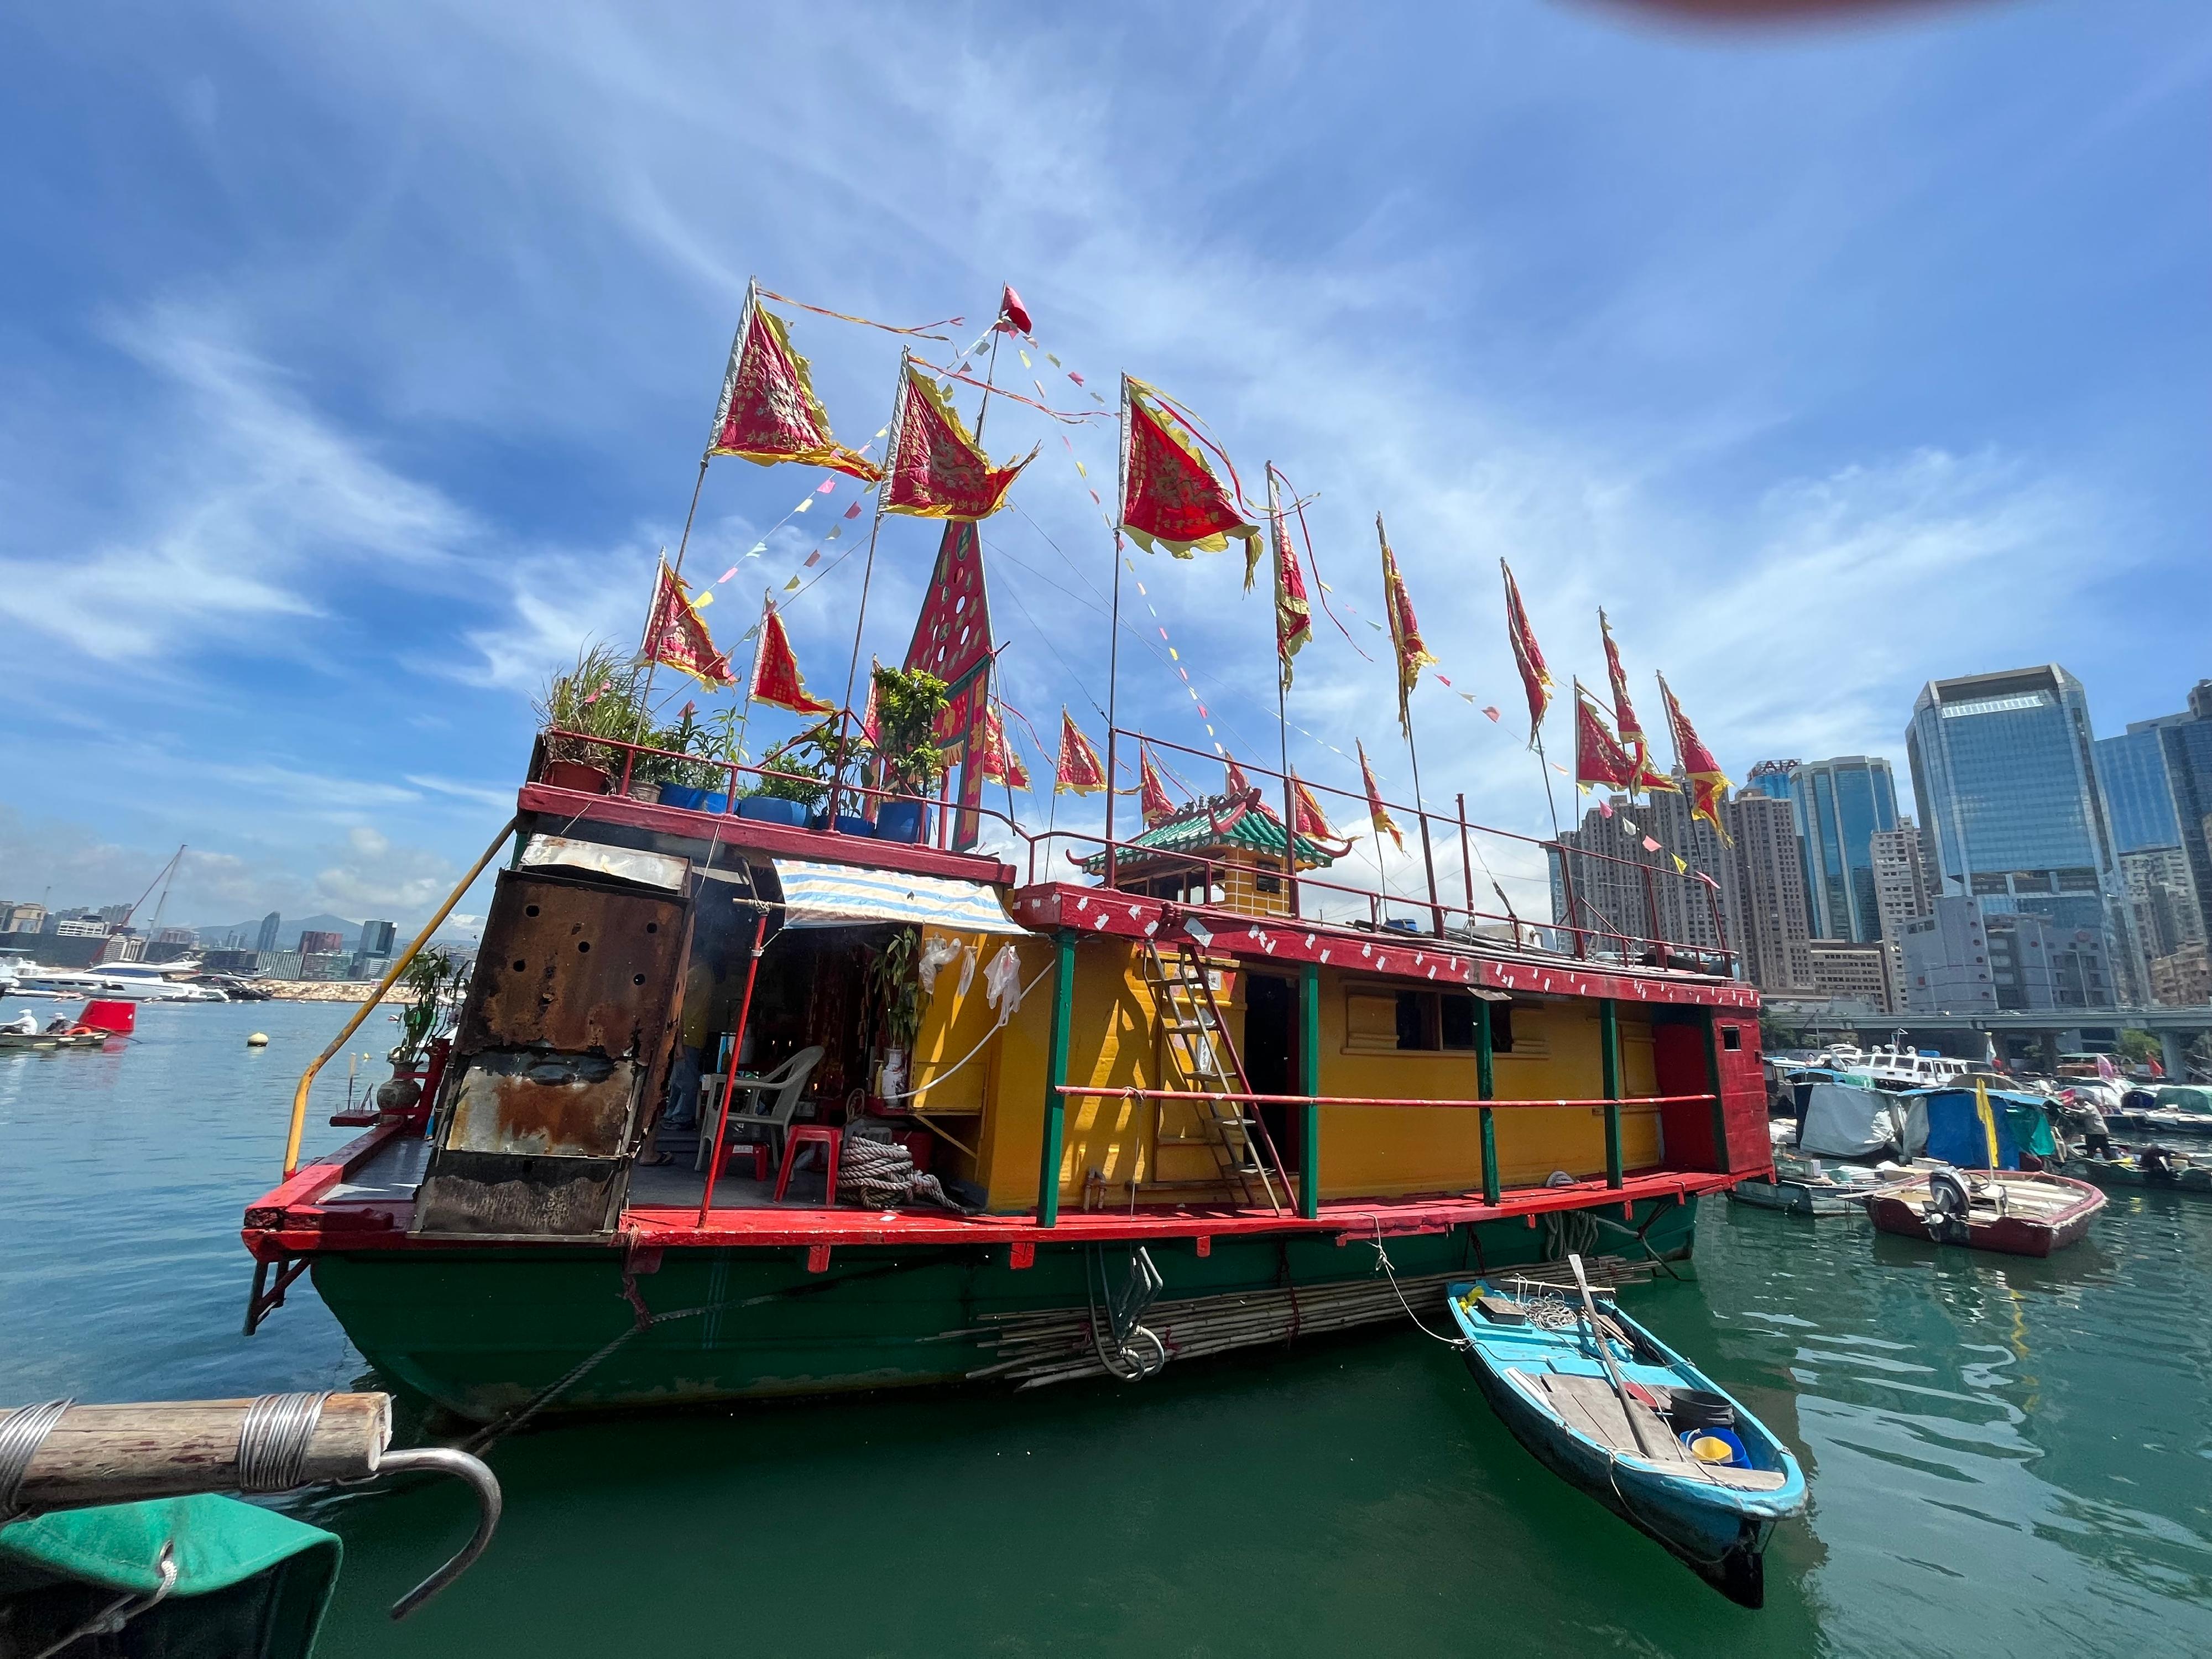 The Revitalised Typhoon Shelter Precinct at the Causeway Bay Typhoon Shelter waterfront of Victoria Park Road will be officially opened next Friday (September 9). Visitors can visit the only Triangular Island Goddess of Tin Hau Shrine of Peace, which has been standing on the waterfront for almost seven decades.